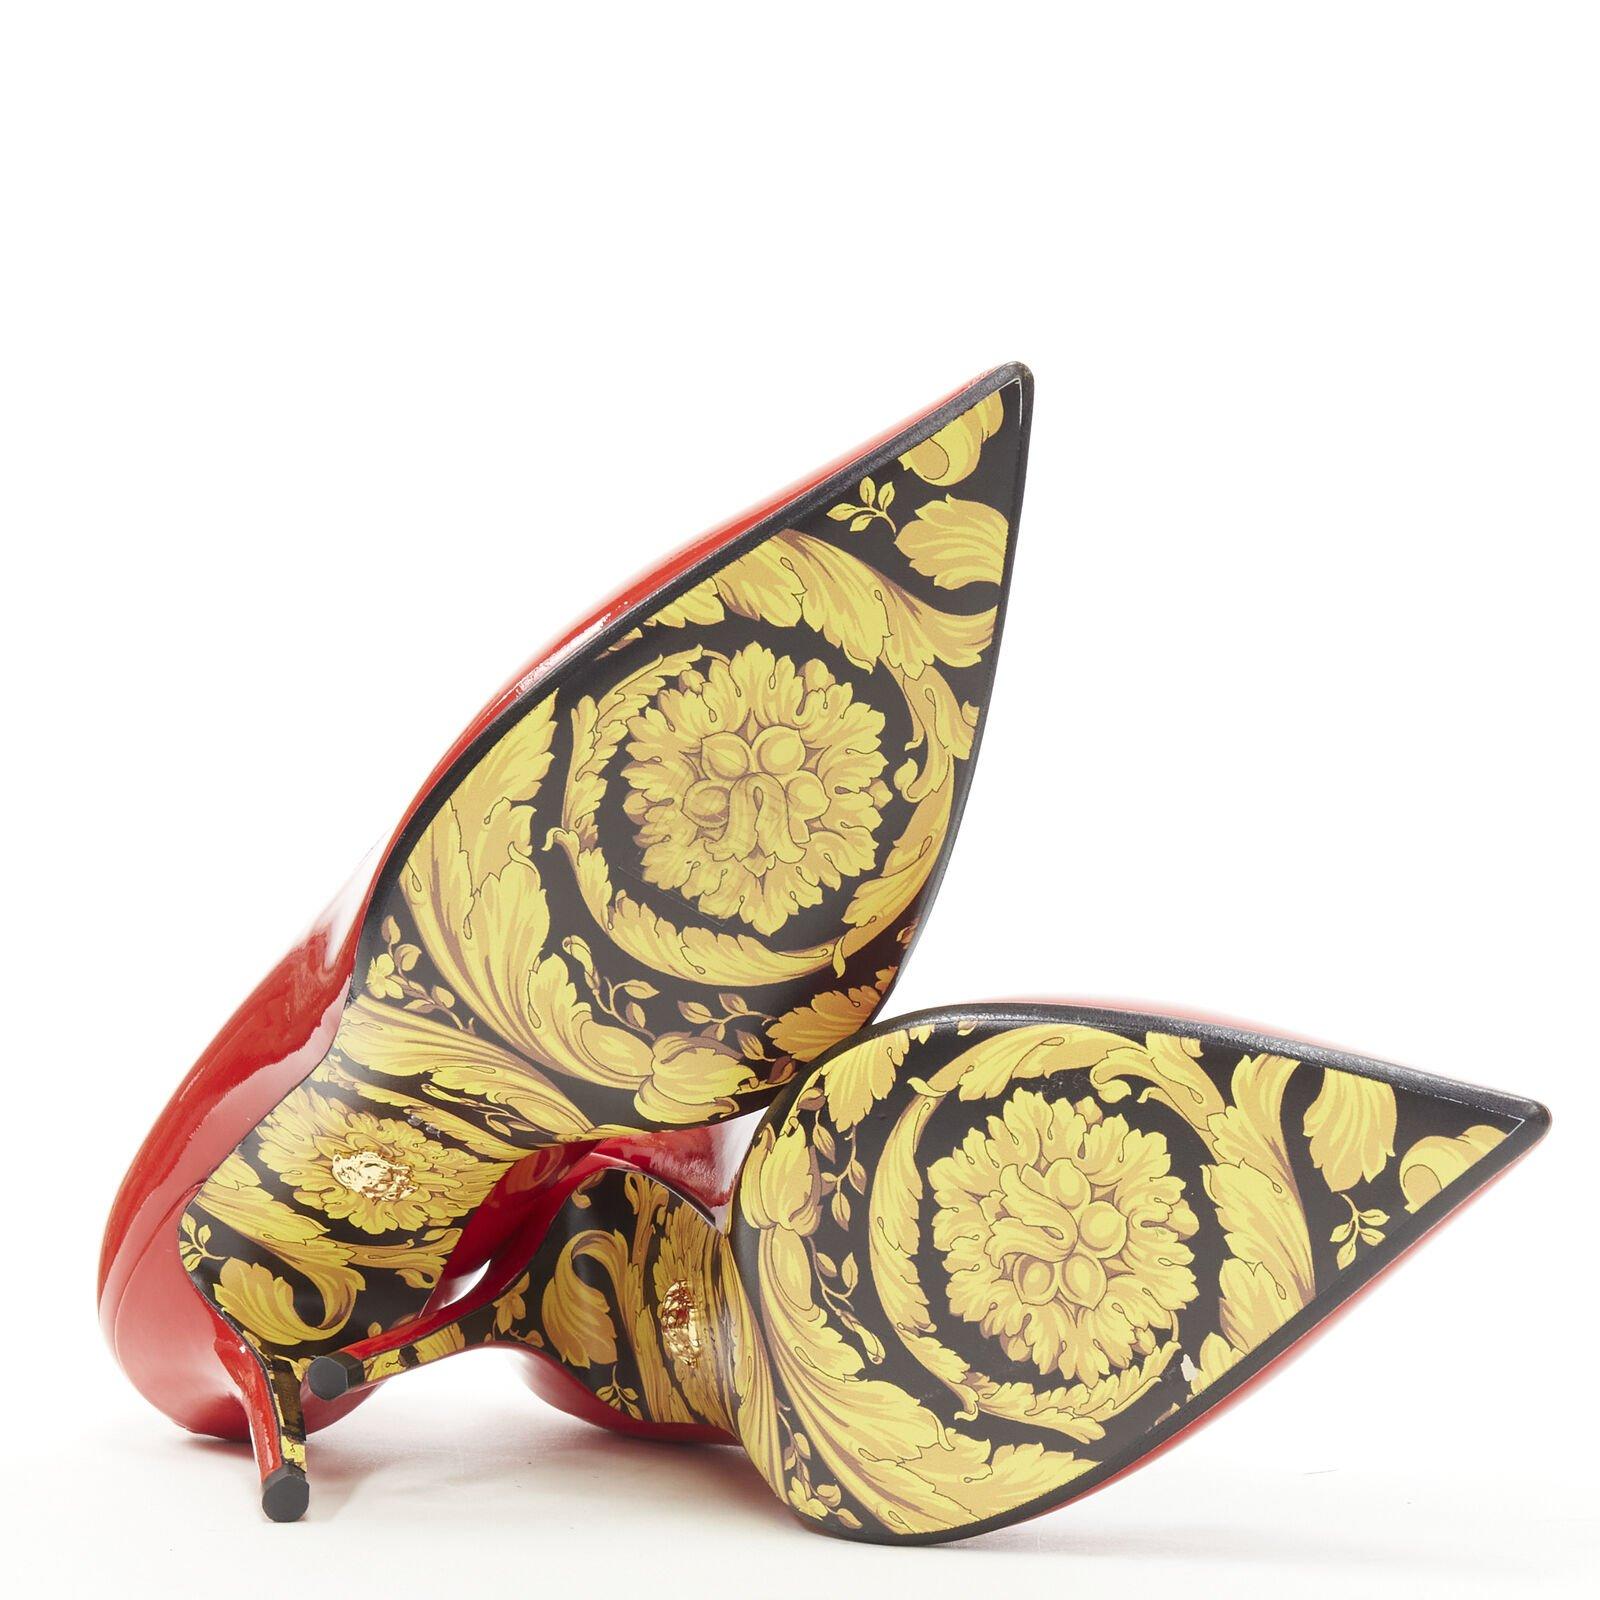 VERSACE Hibiscus Barocco gold sole red patent Medusa stud pump EU37.5 US7.5 For Sale 2